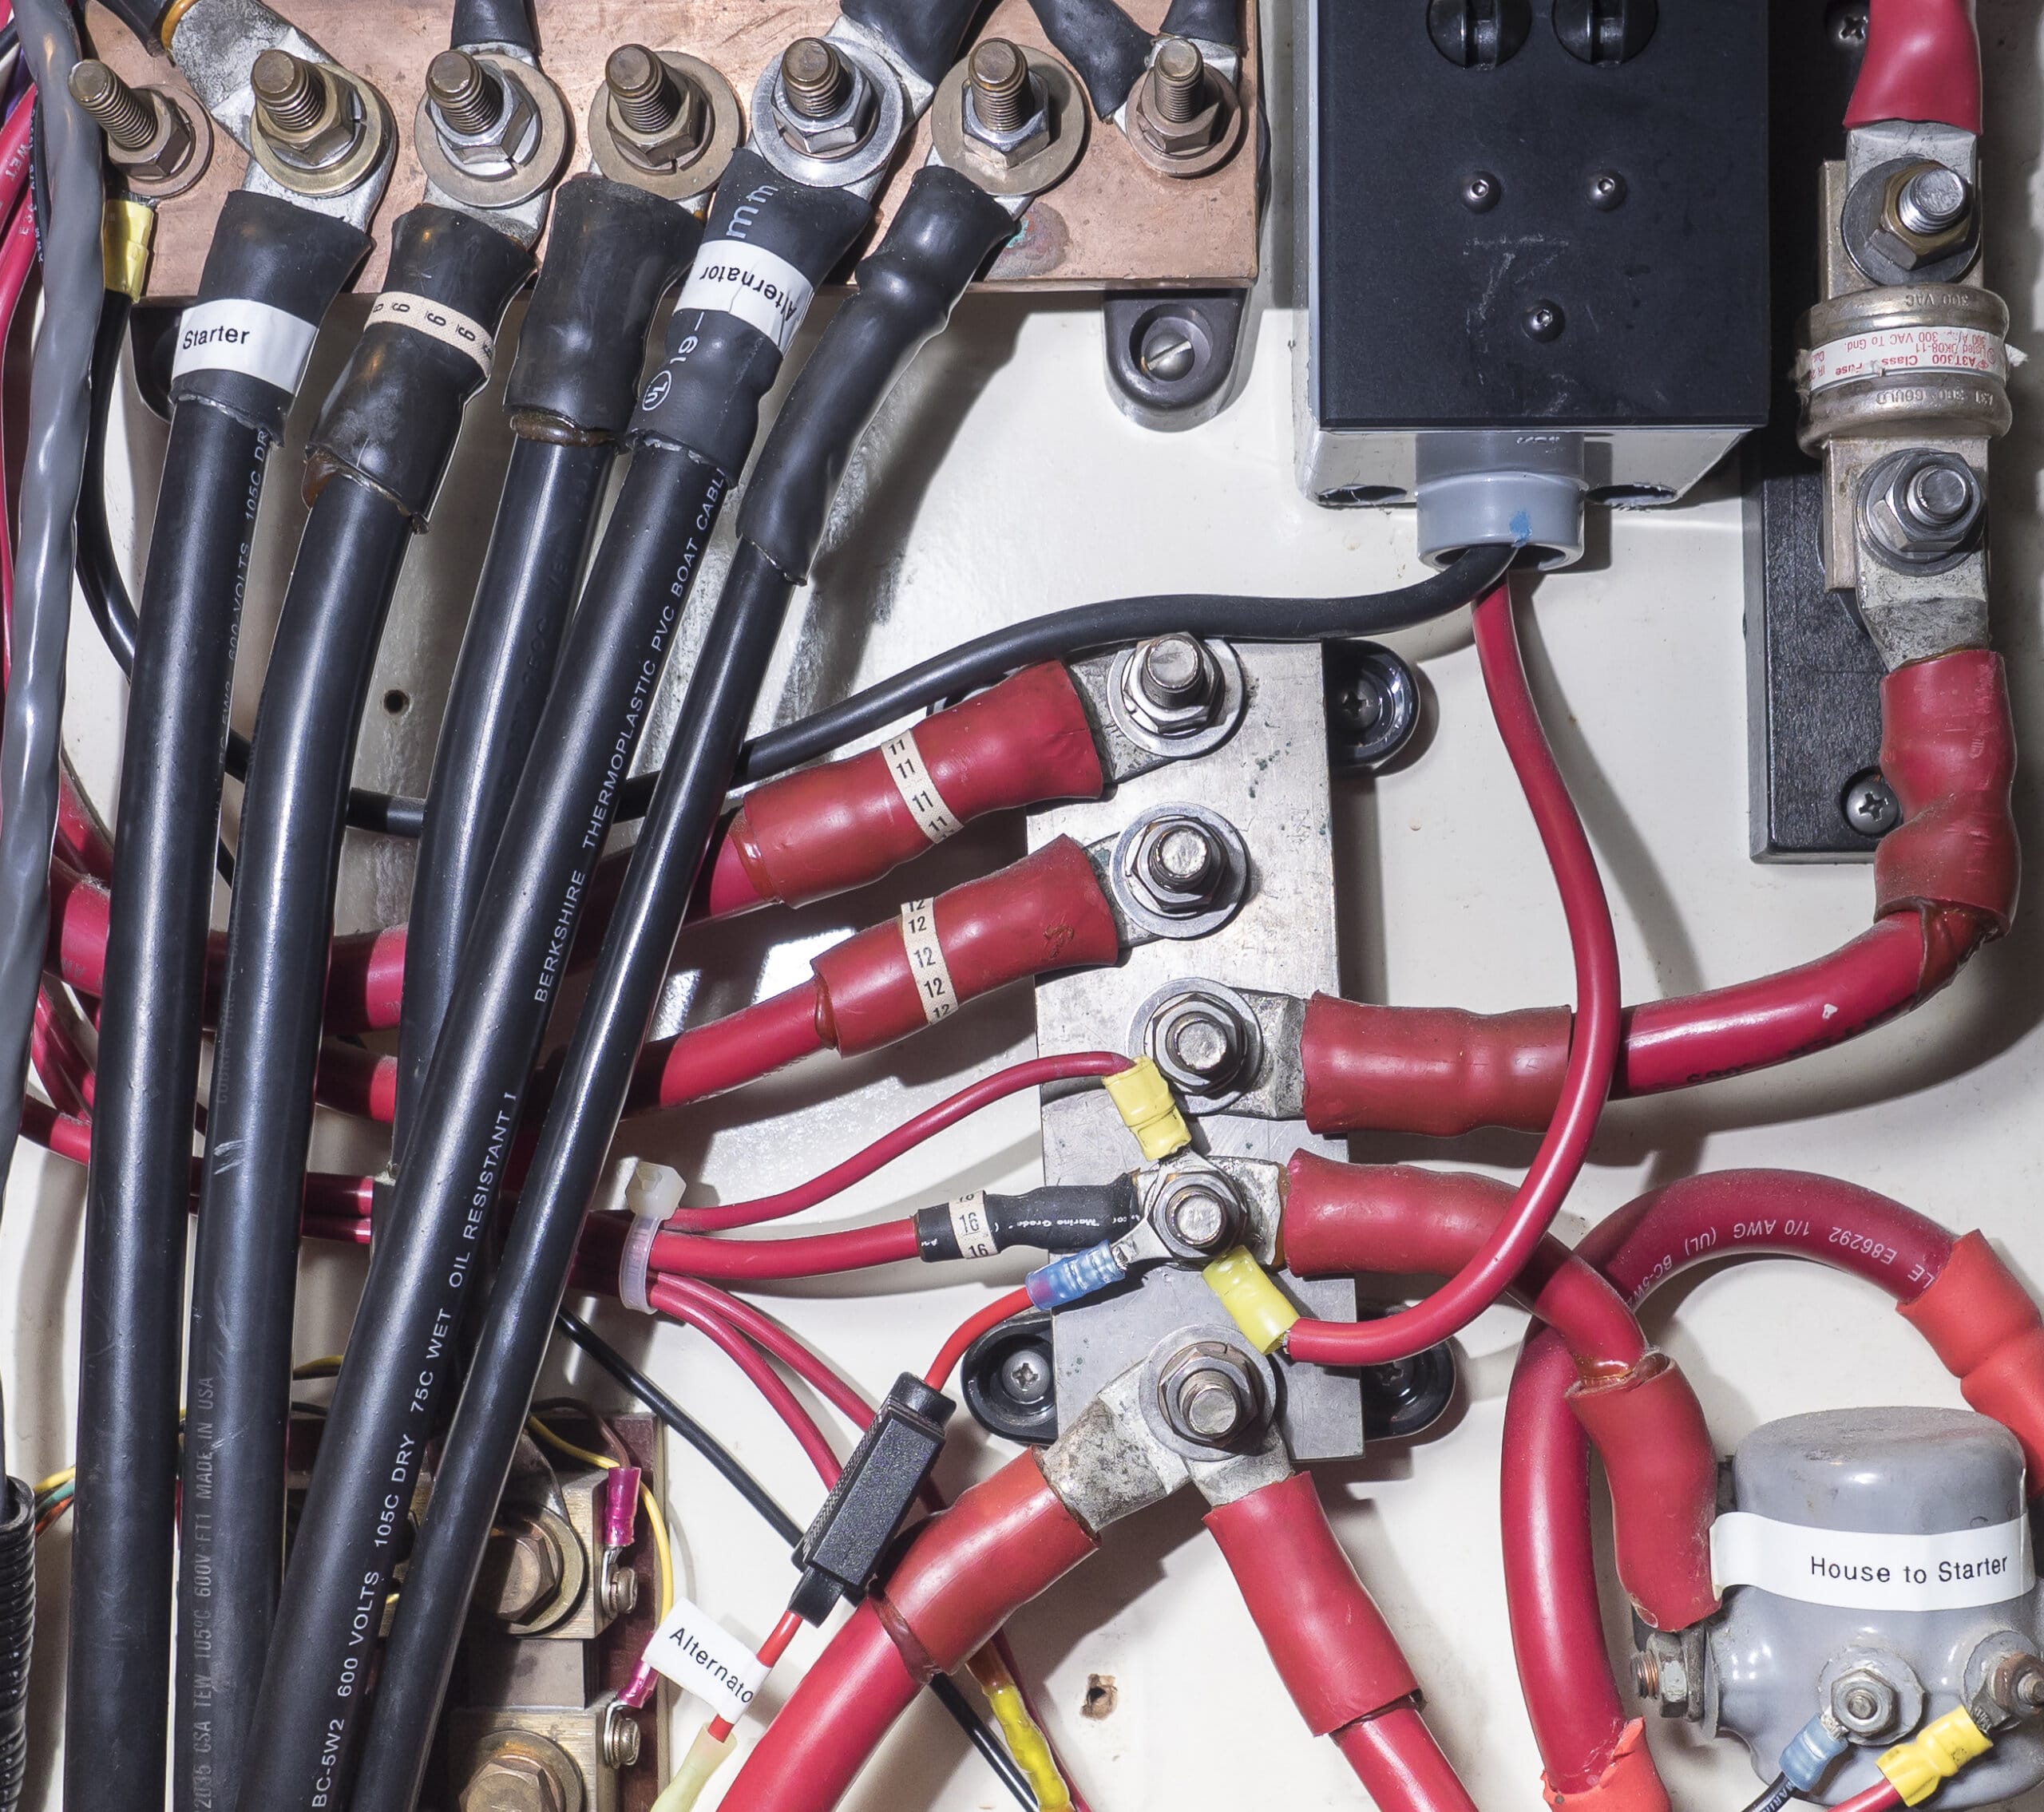 Should Your Boat's DC Electrical System Be 12 or 24 Volt?—Part 1